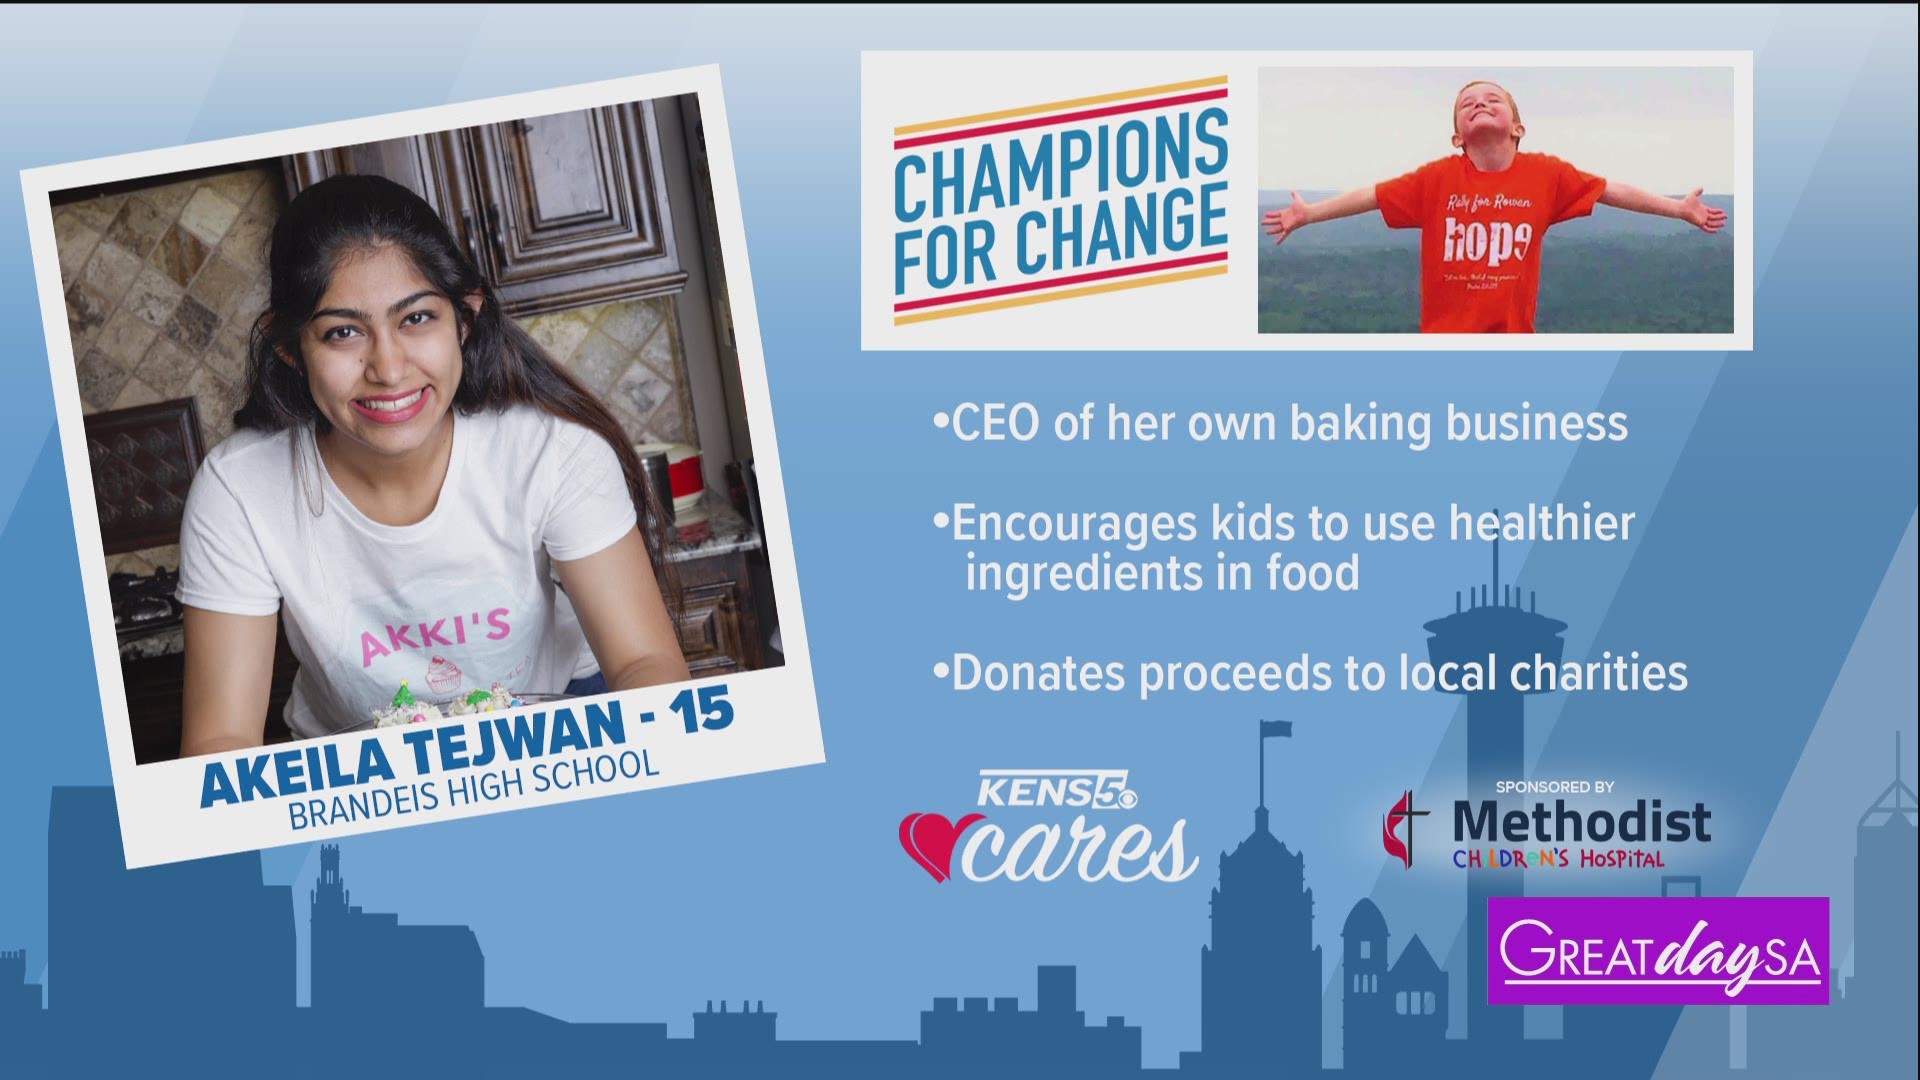 Congratulations to our Champion For Change, Akeila Tejwan, who started her own baking business and donates profits to charity.